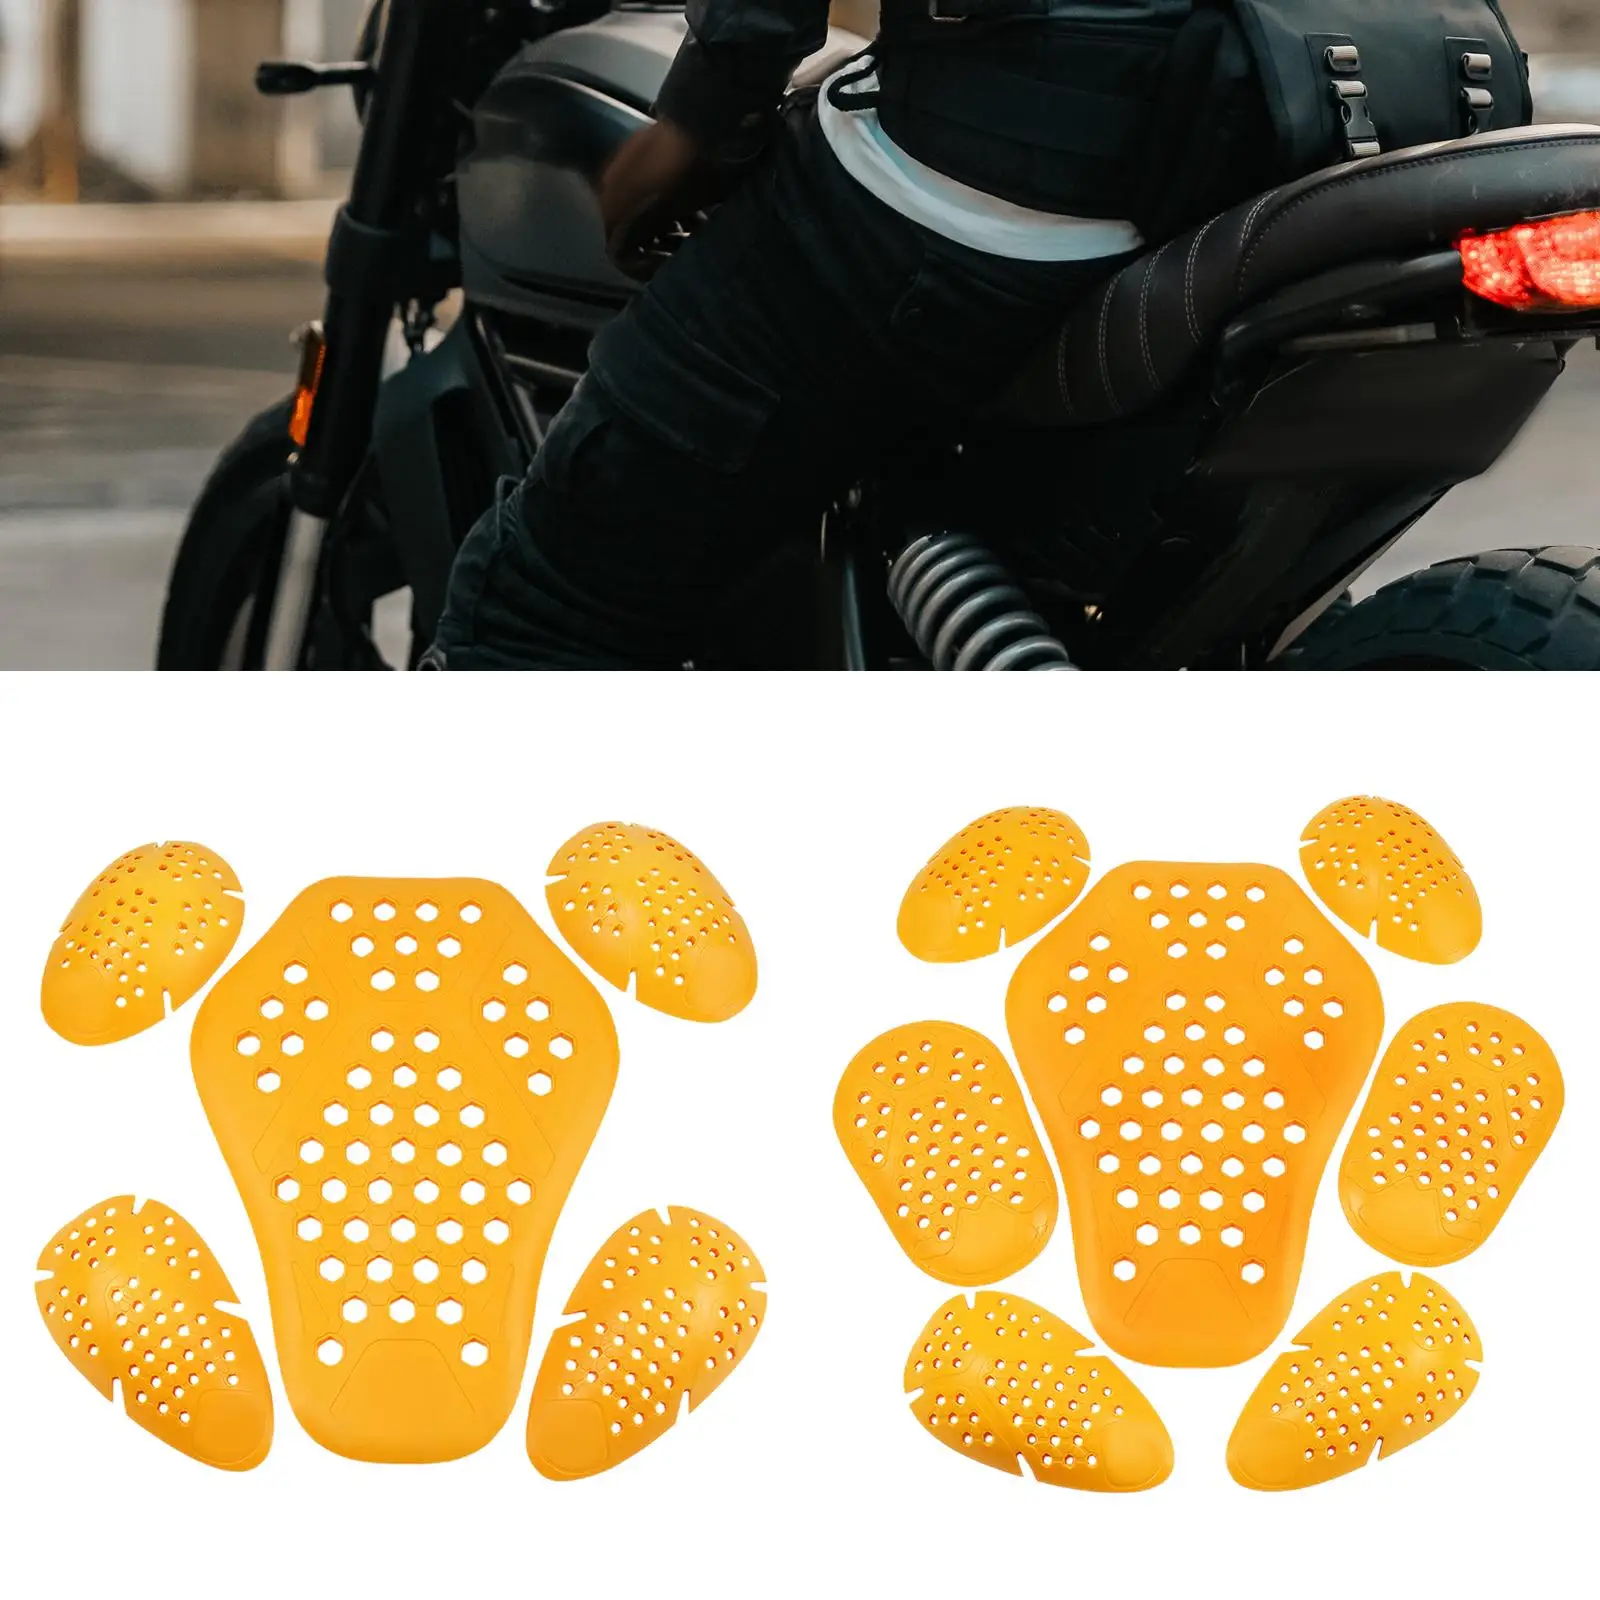 Motorcycle Jacket Armor Built in Protective Gear Armor Pad Set Moto Accessories Elbow Back Protector Jacket Insert Dorsal